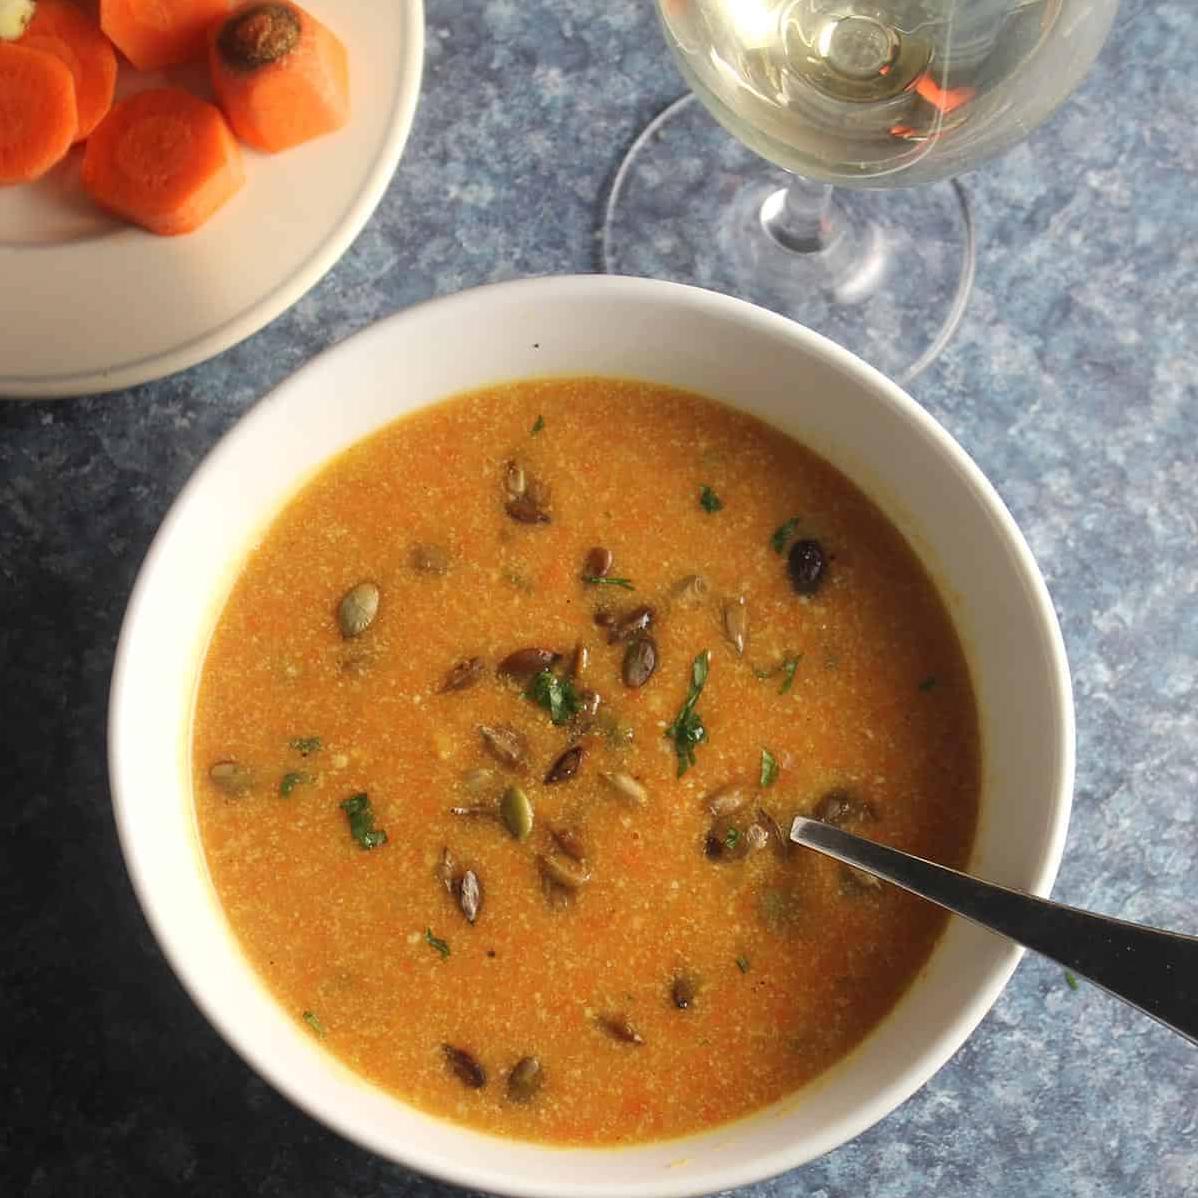  Get ready to warm up your taste buds with this delicious soup